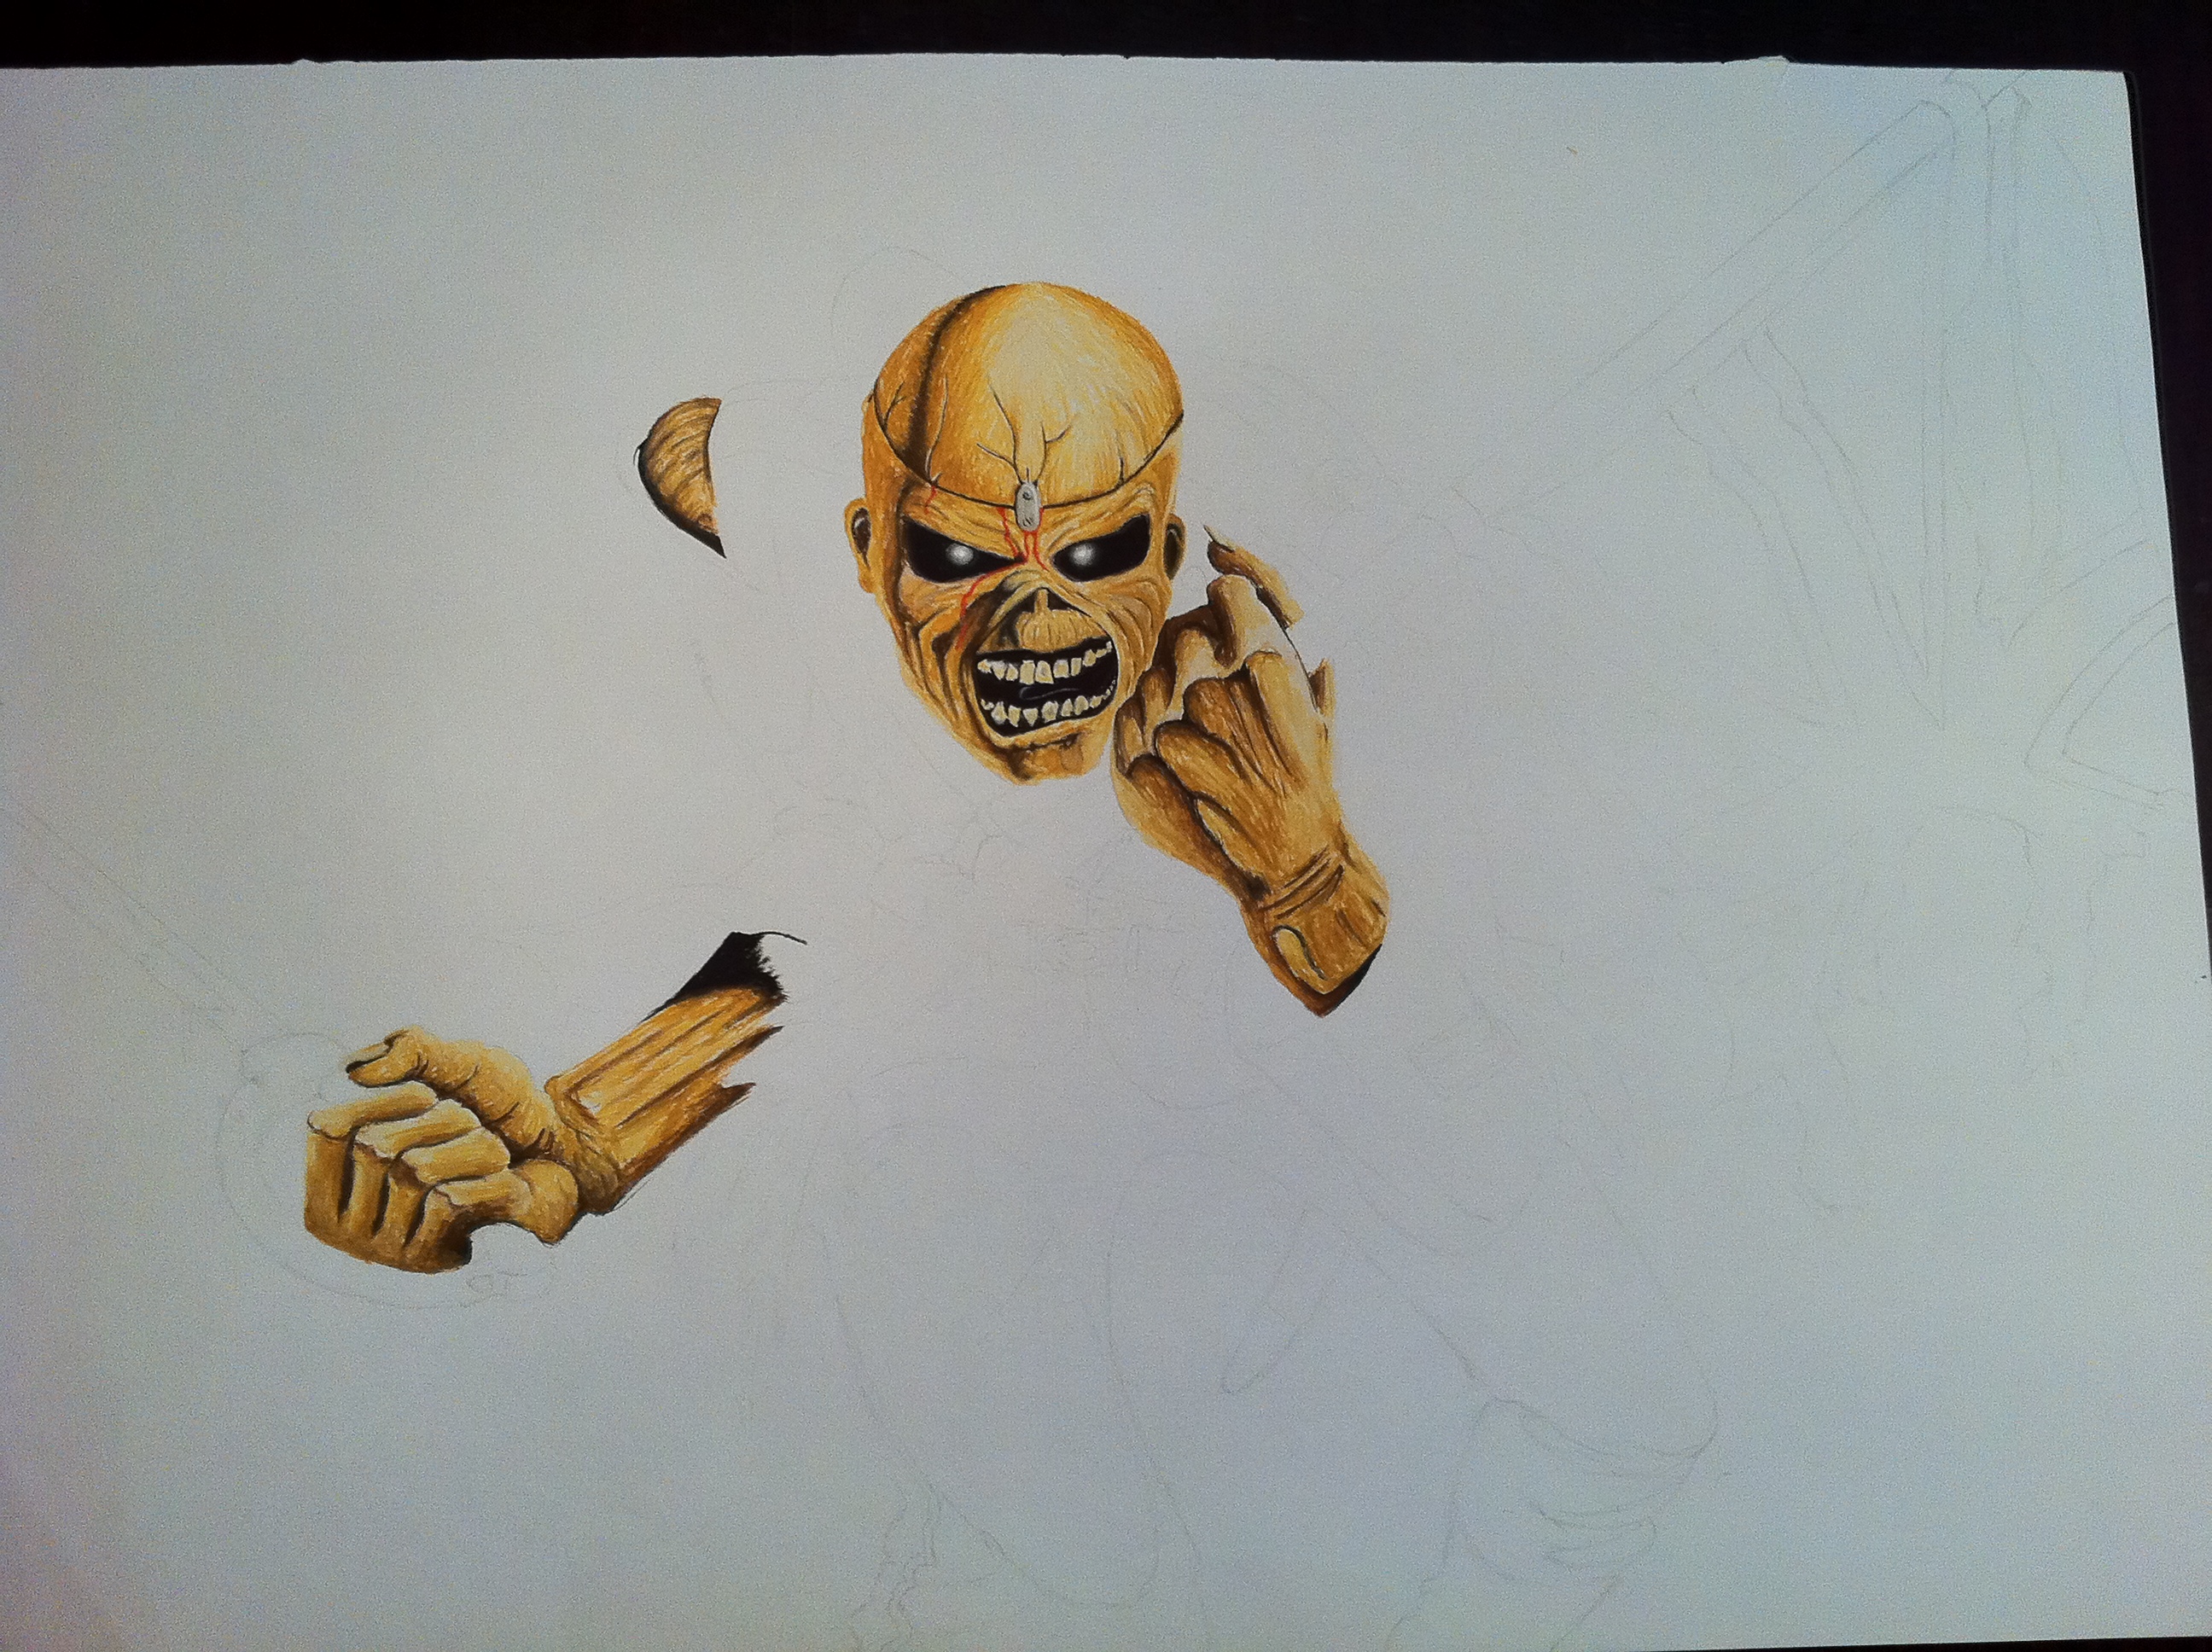 iron maiden the trooper drawing